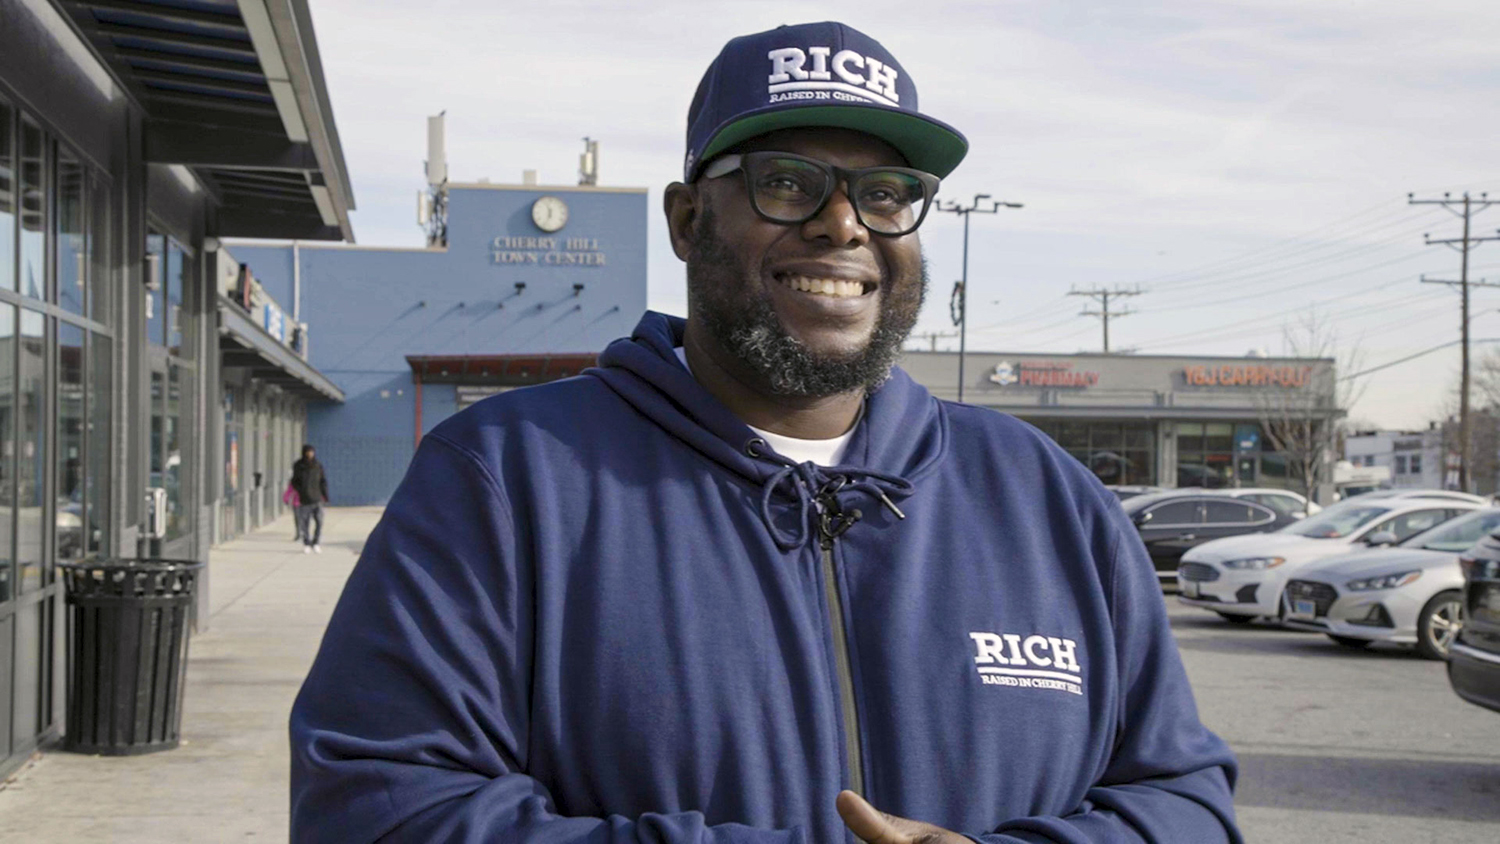 RICH co-founder Michael Battle stands in front of the Cherry Hill Town Center. He has a full beard, glasses, and a big smile, and is wearing a cap and a navy blue sweatshirt, both emblazoned with the RICH logo.